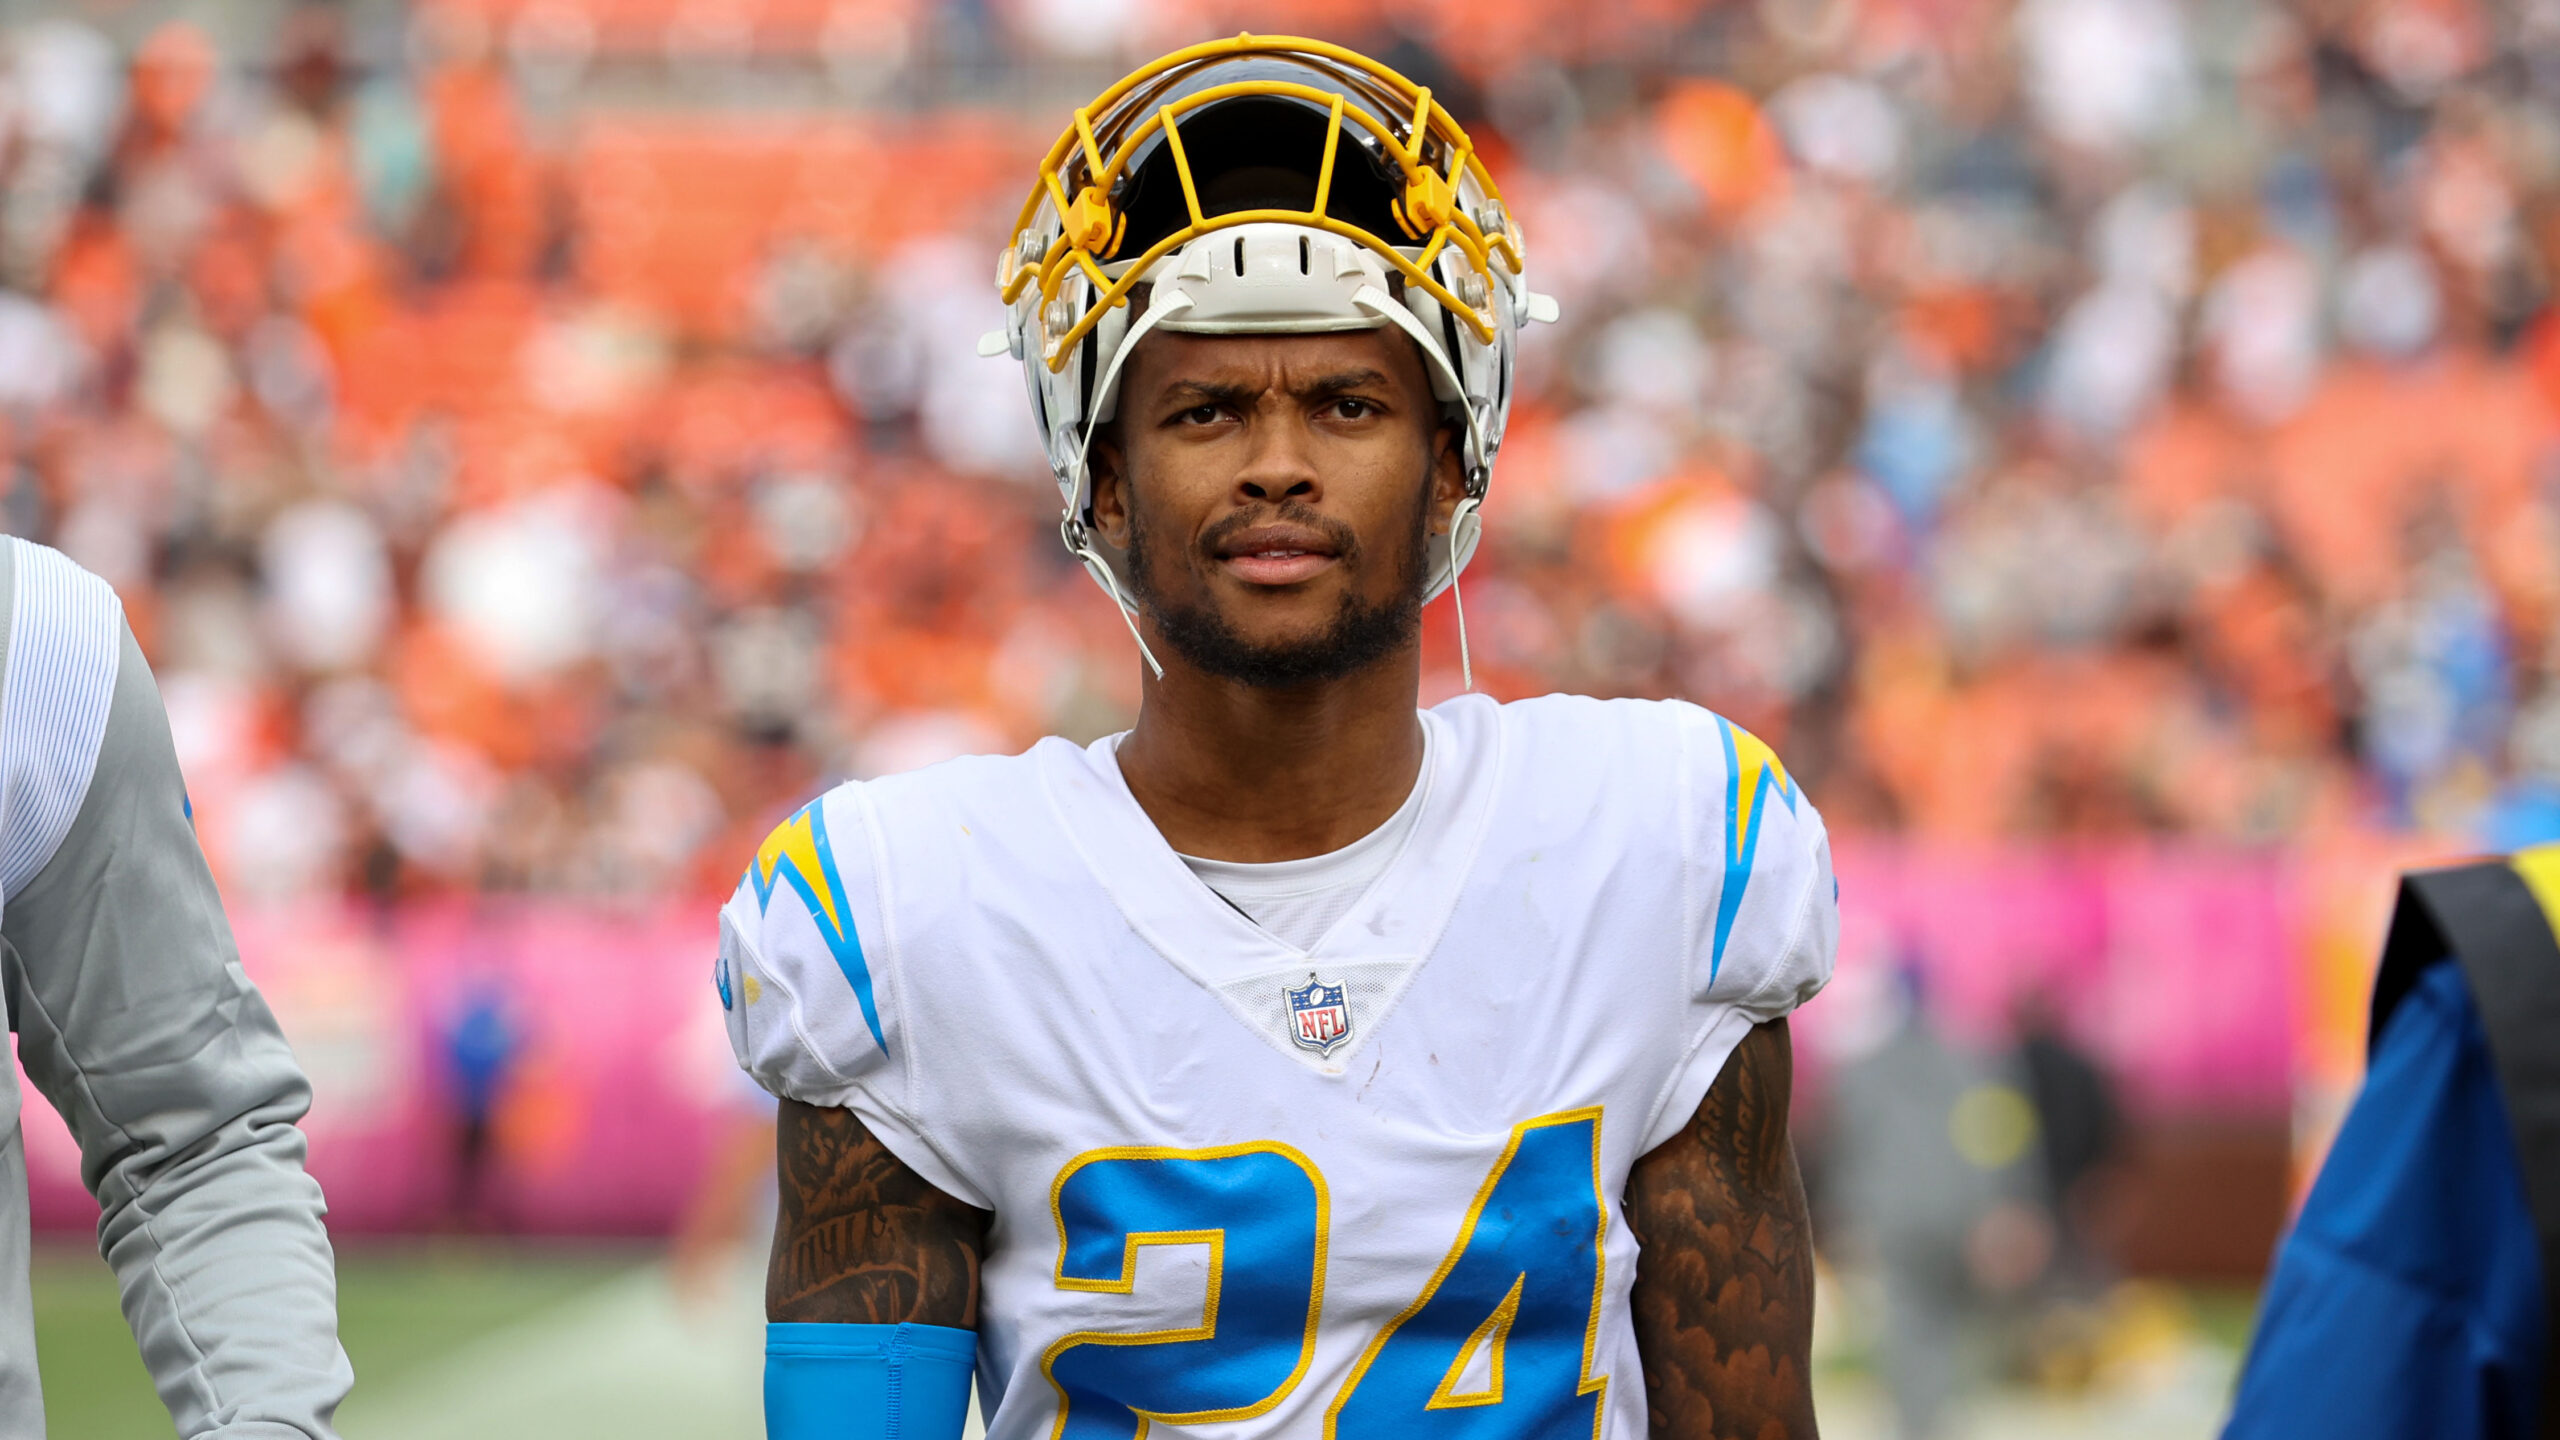 NFL Safety Concludes Career After Just 4 Years: 'My Well-Being Comes First'